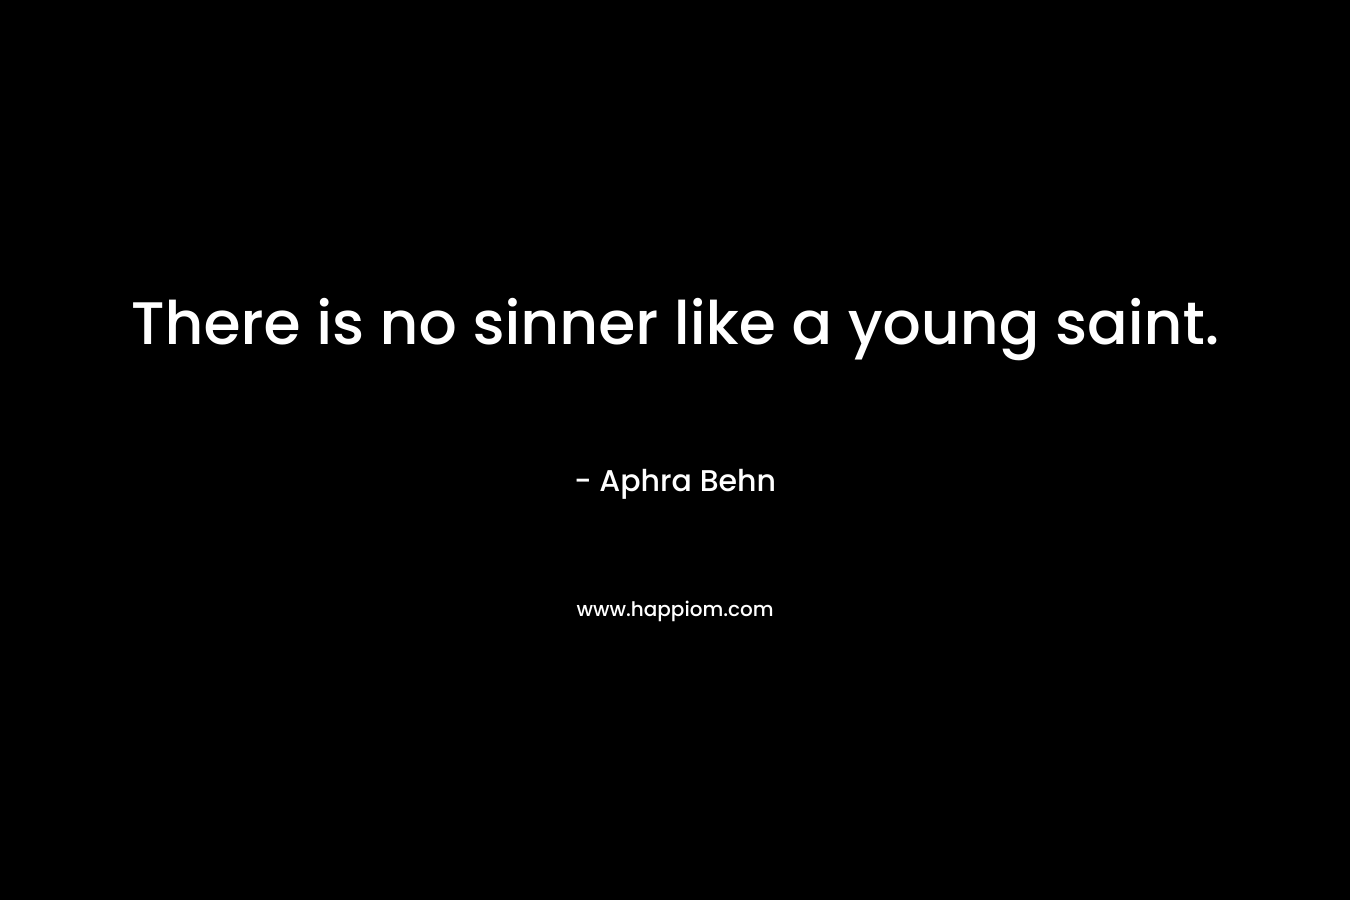 There is no sinner like a young saint. – Aphra Behn